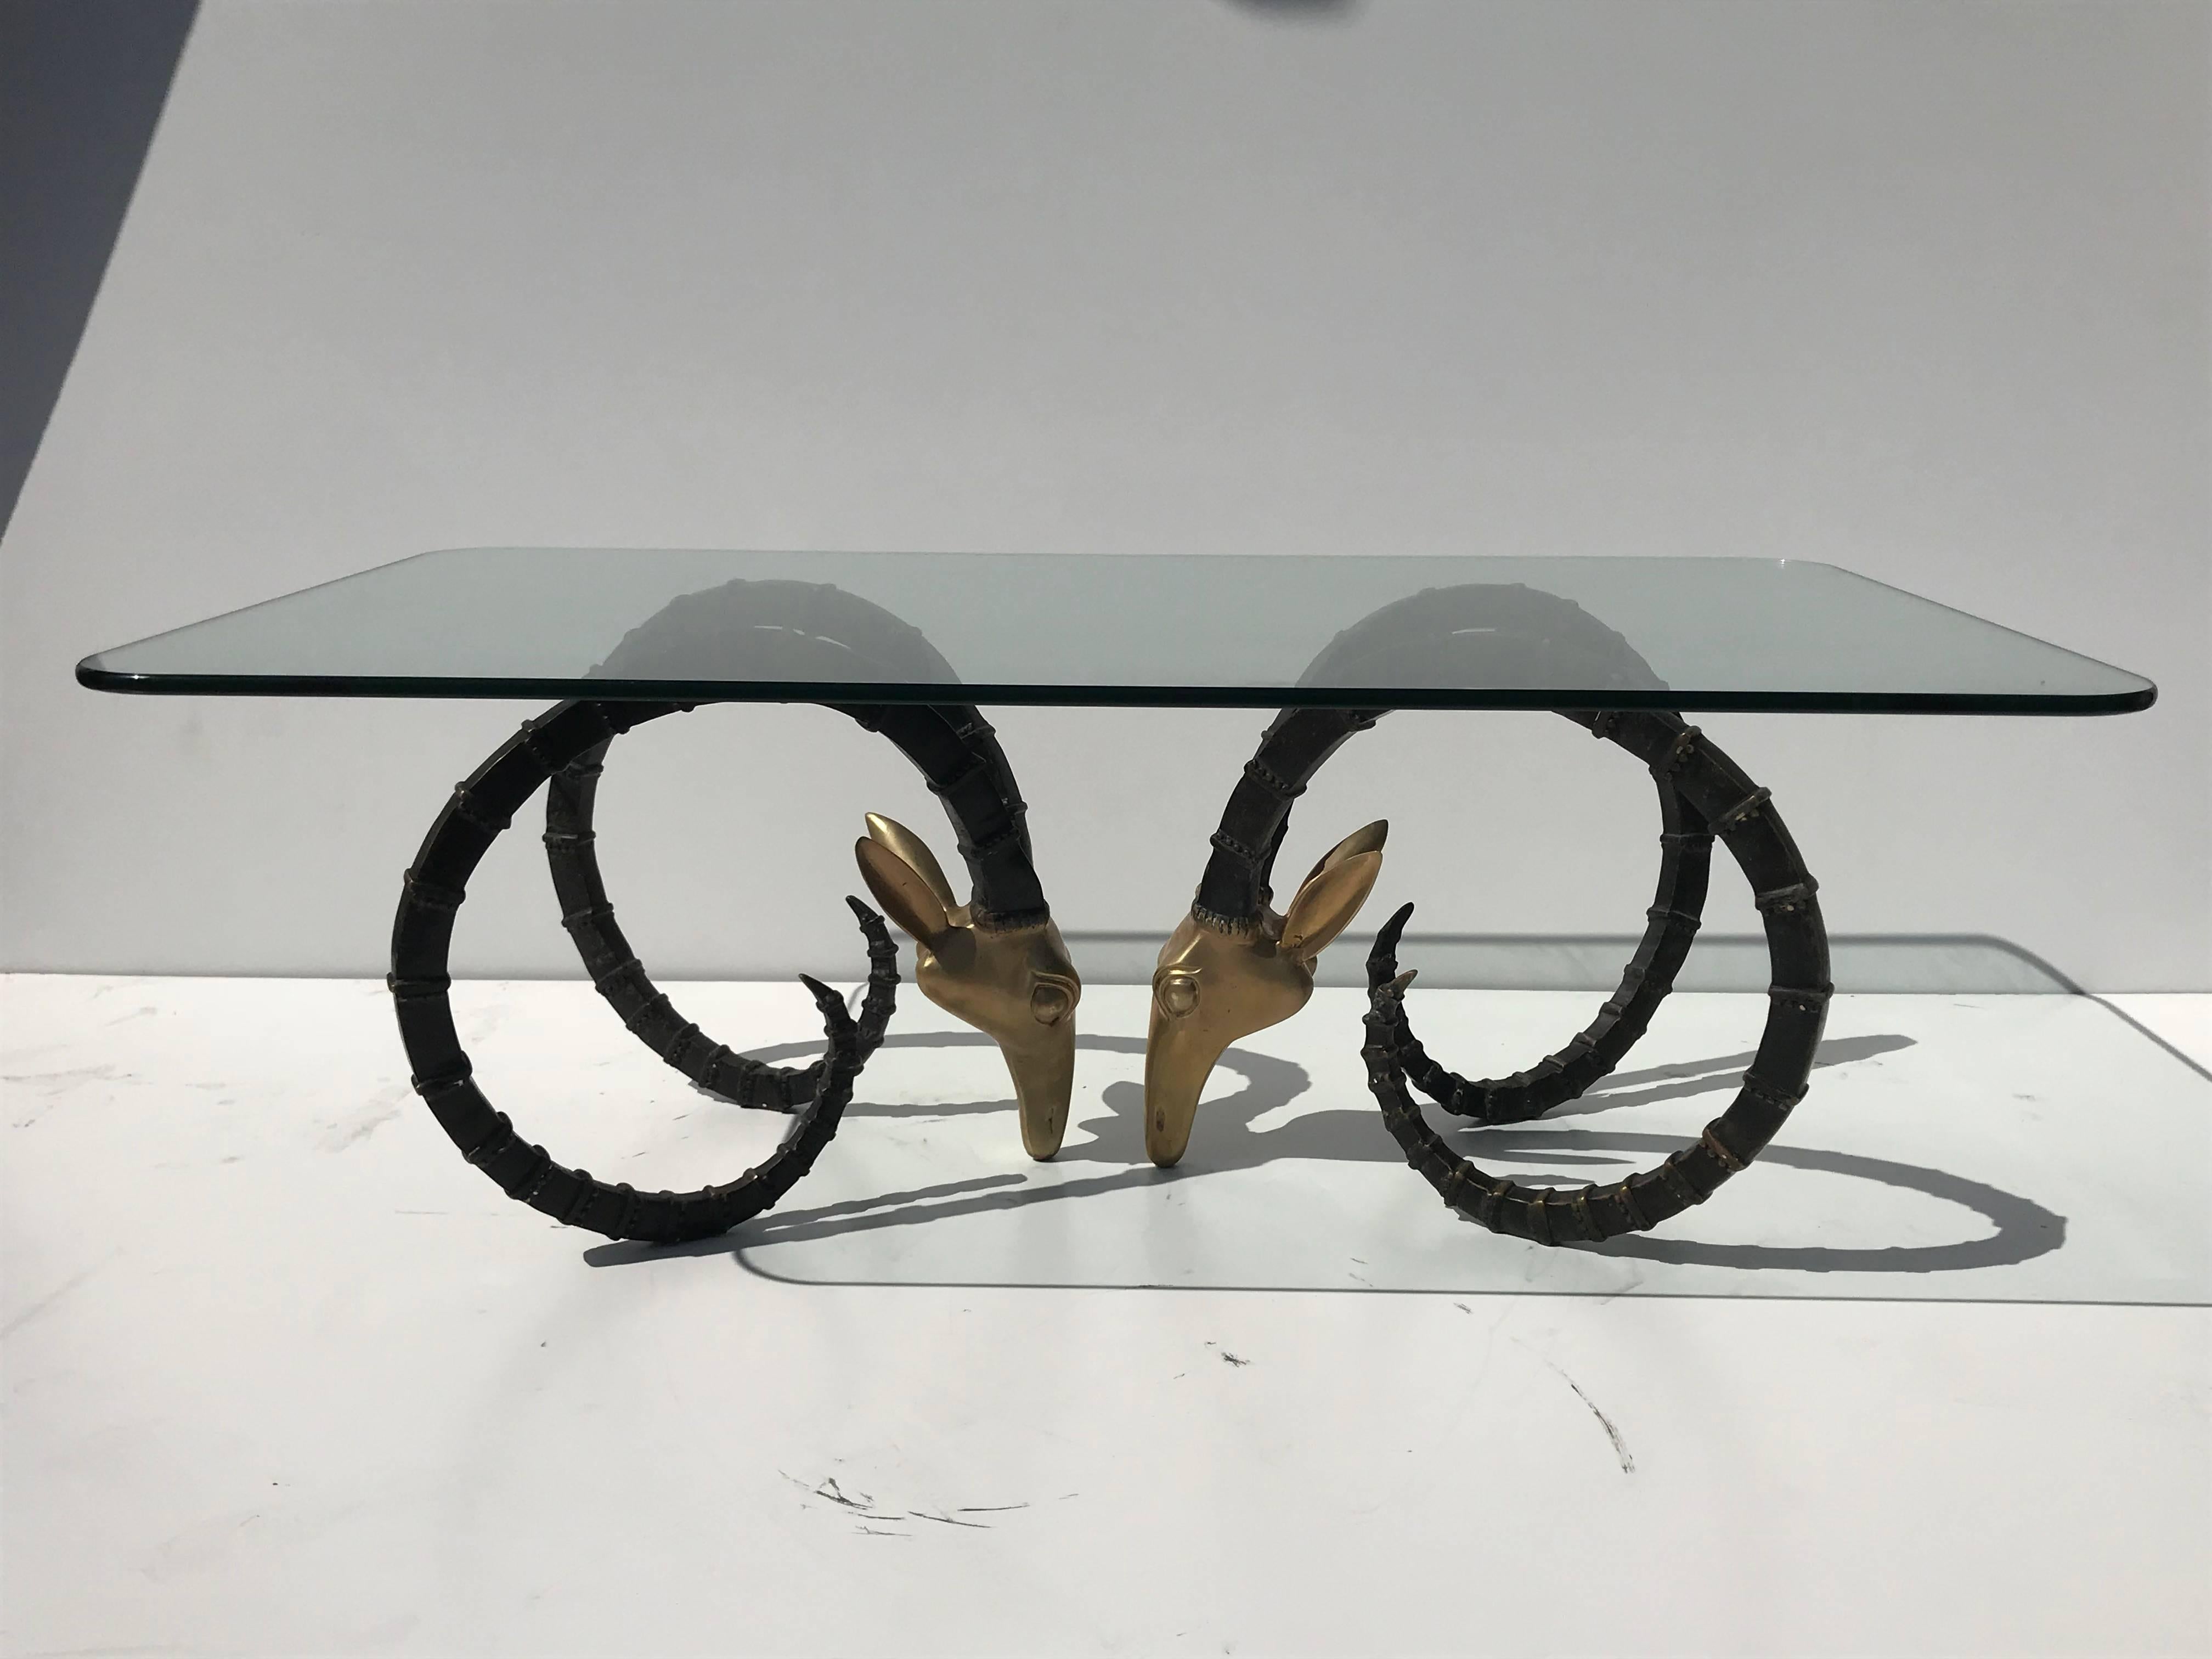 Brass ibex or ram head coffee table in the style of Alain Chervet
Each base is 19